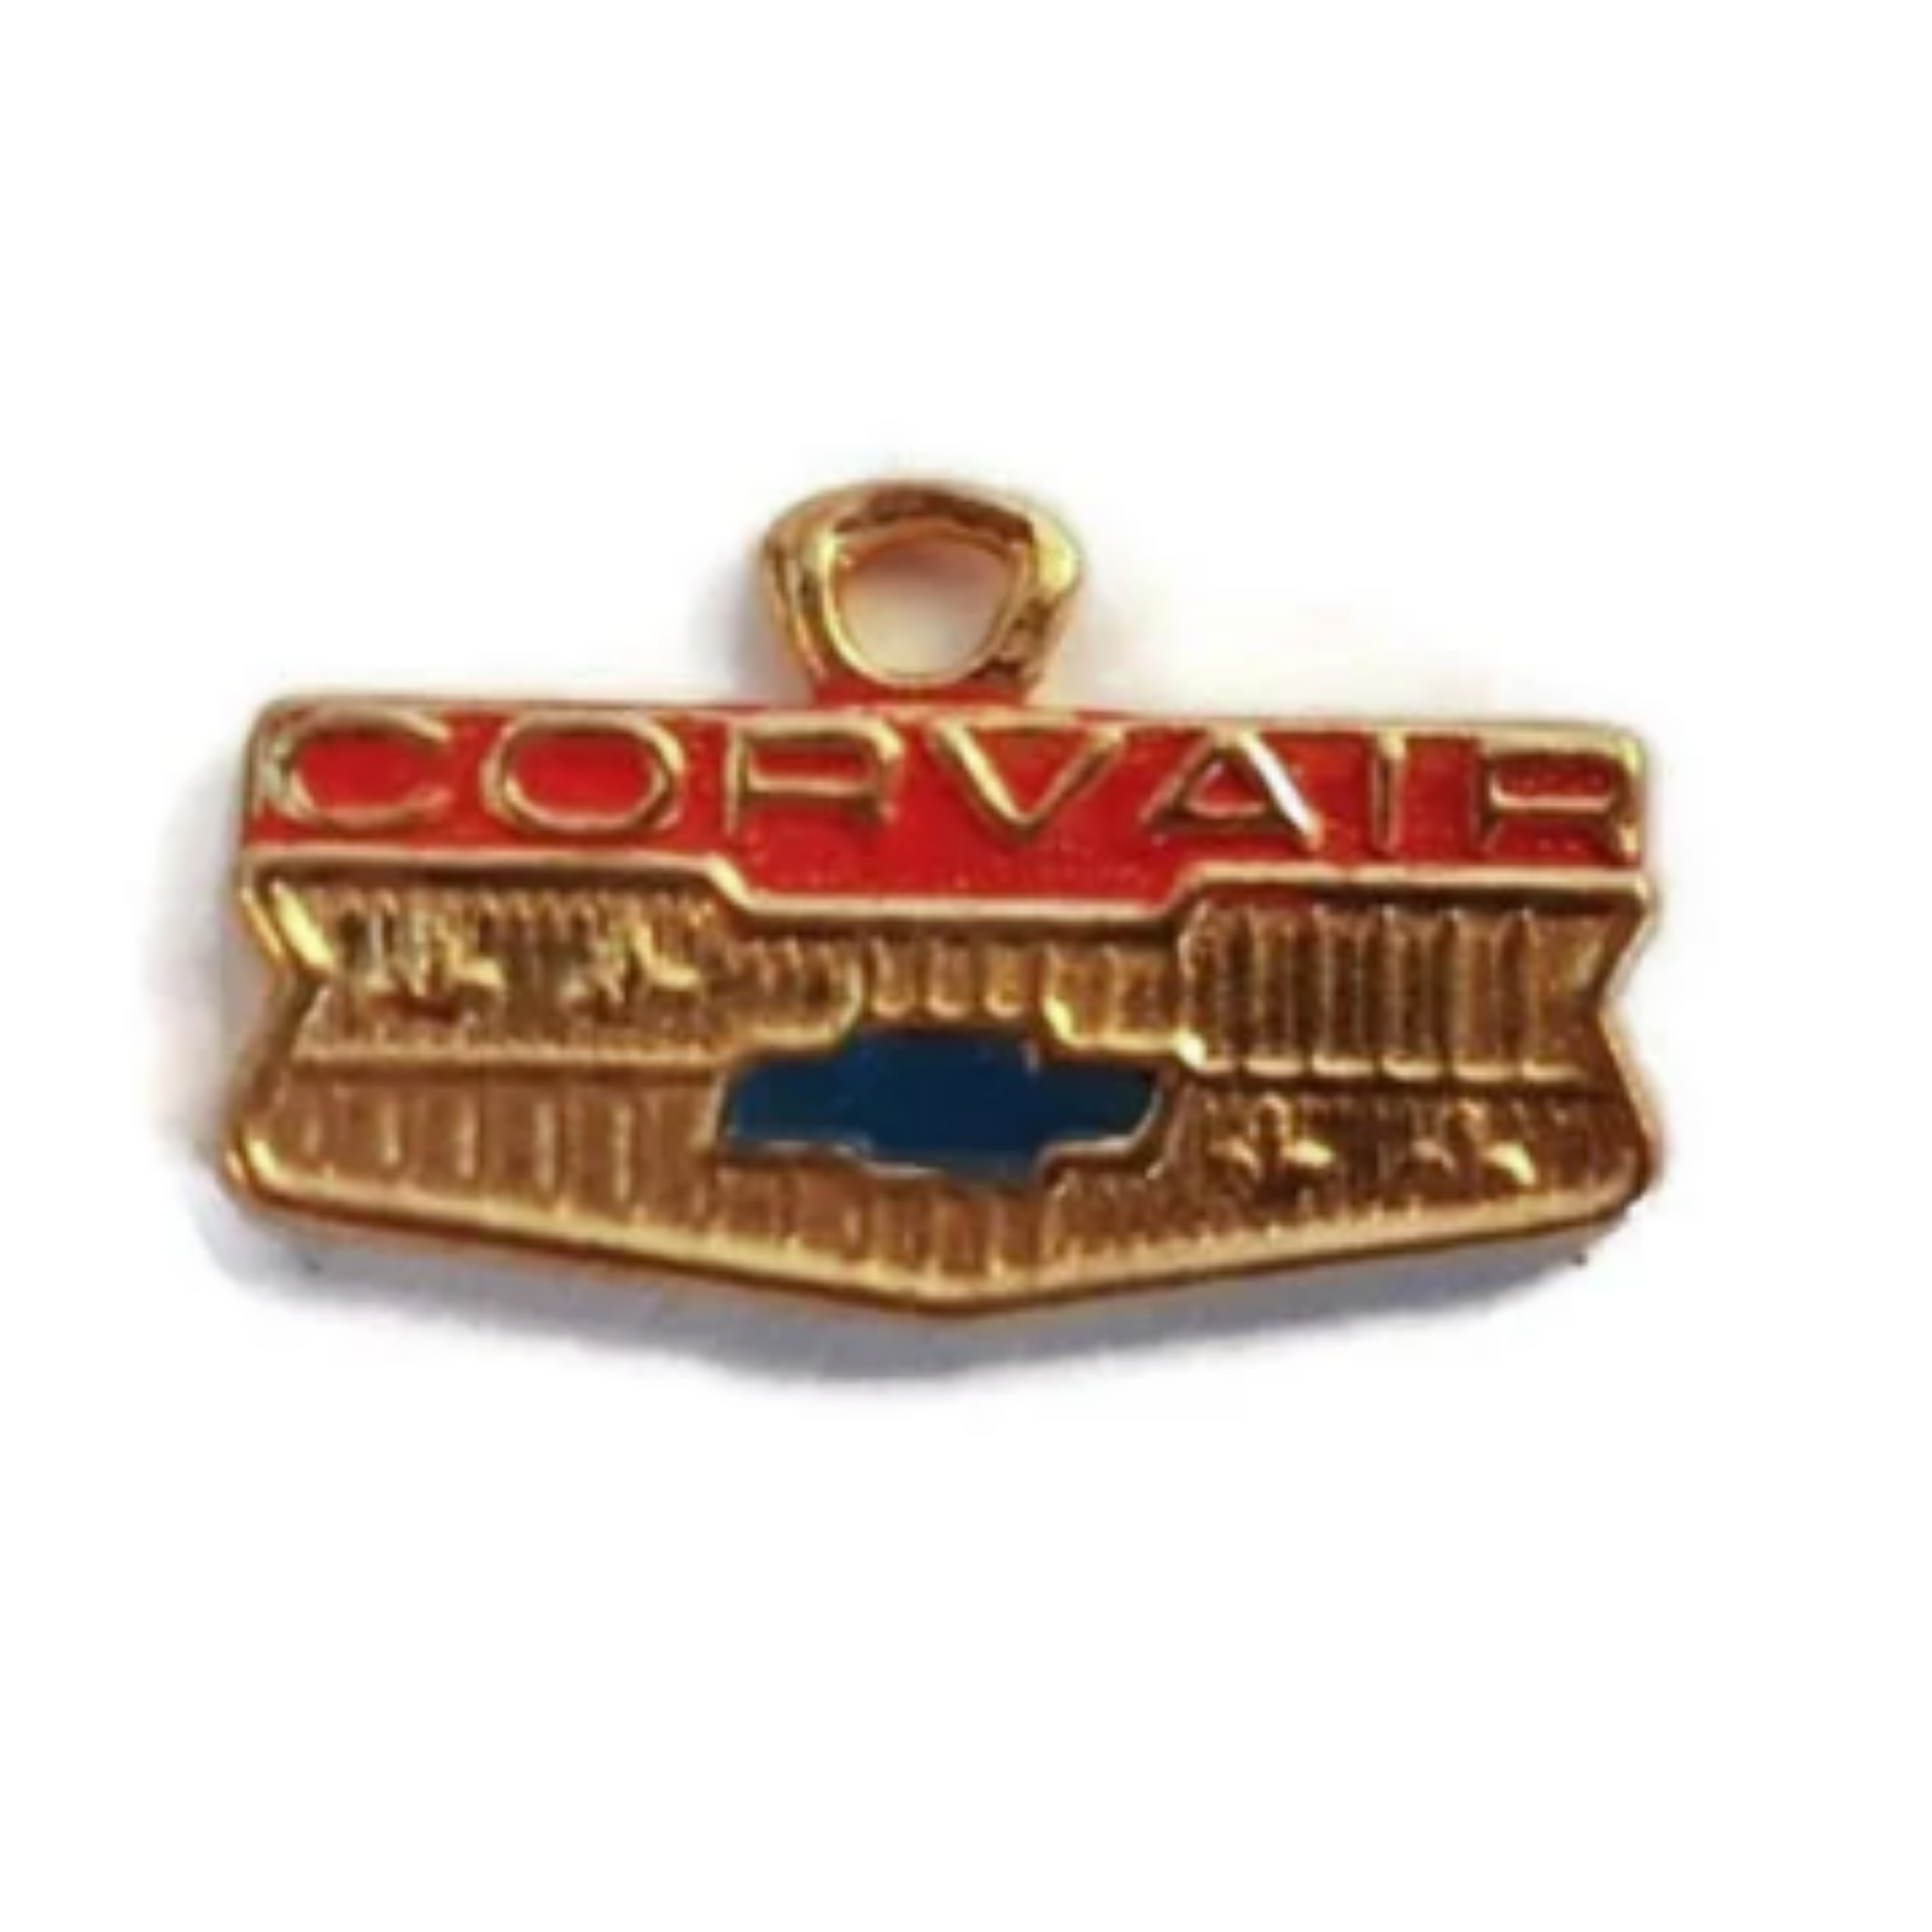 corvair keychain key chain vintage automotive collectible